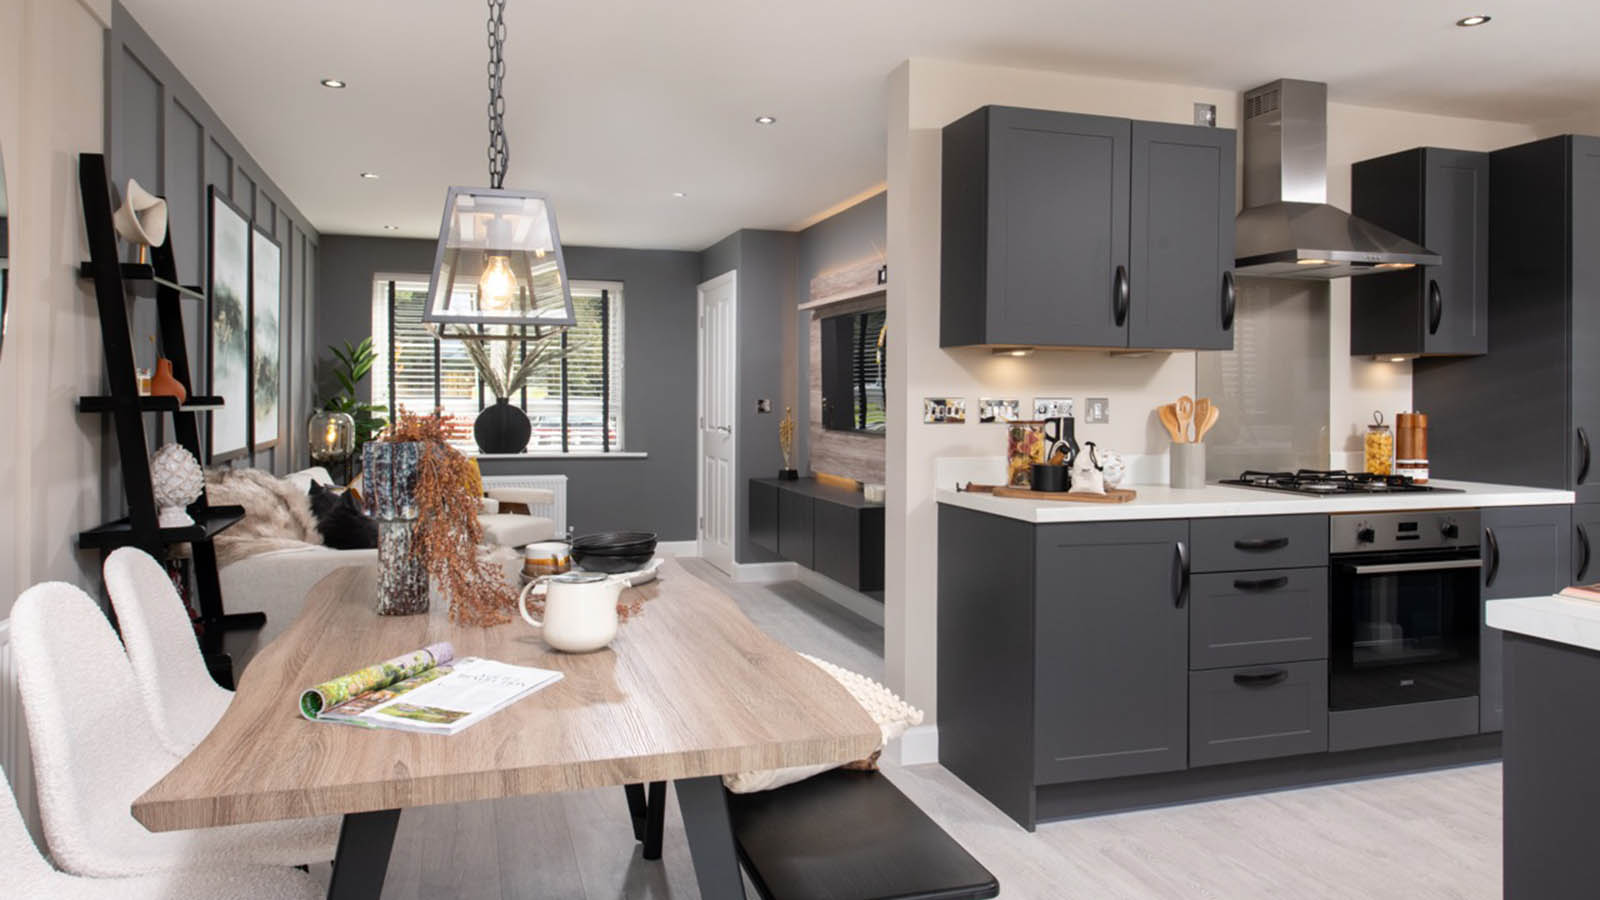 Show home at The Sands (Barratt Homes)